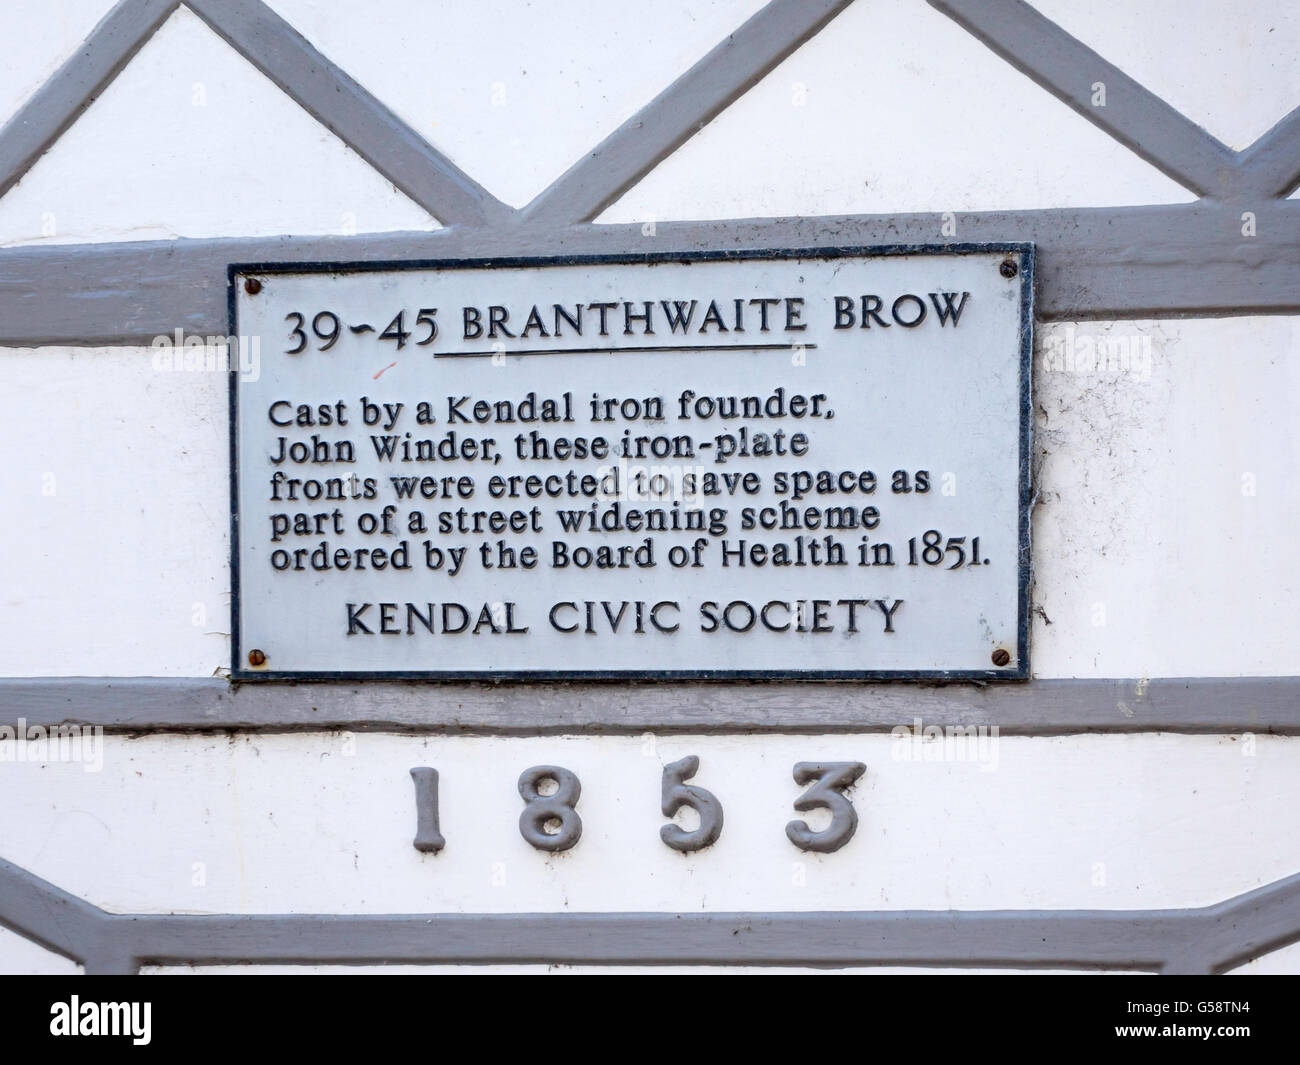 Kendal Civic Society Sign building in Branthwaite Brow Kendal fitted with iron plate fronts to save space for street widening in Stock Photo